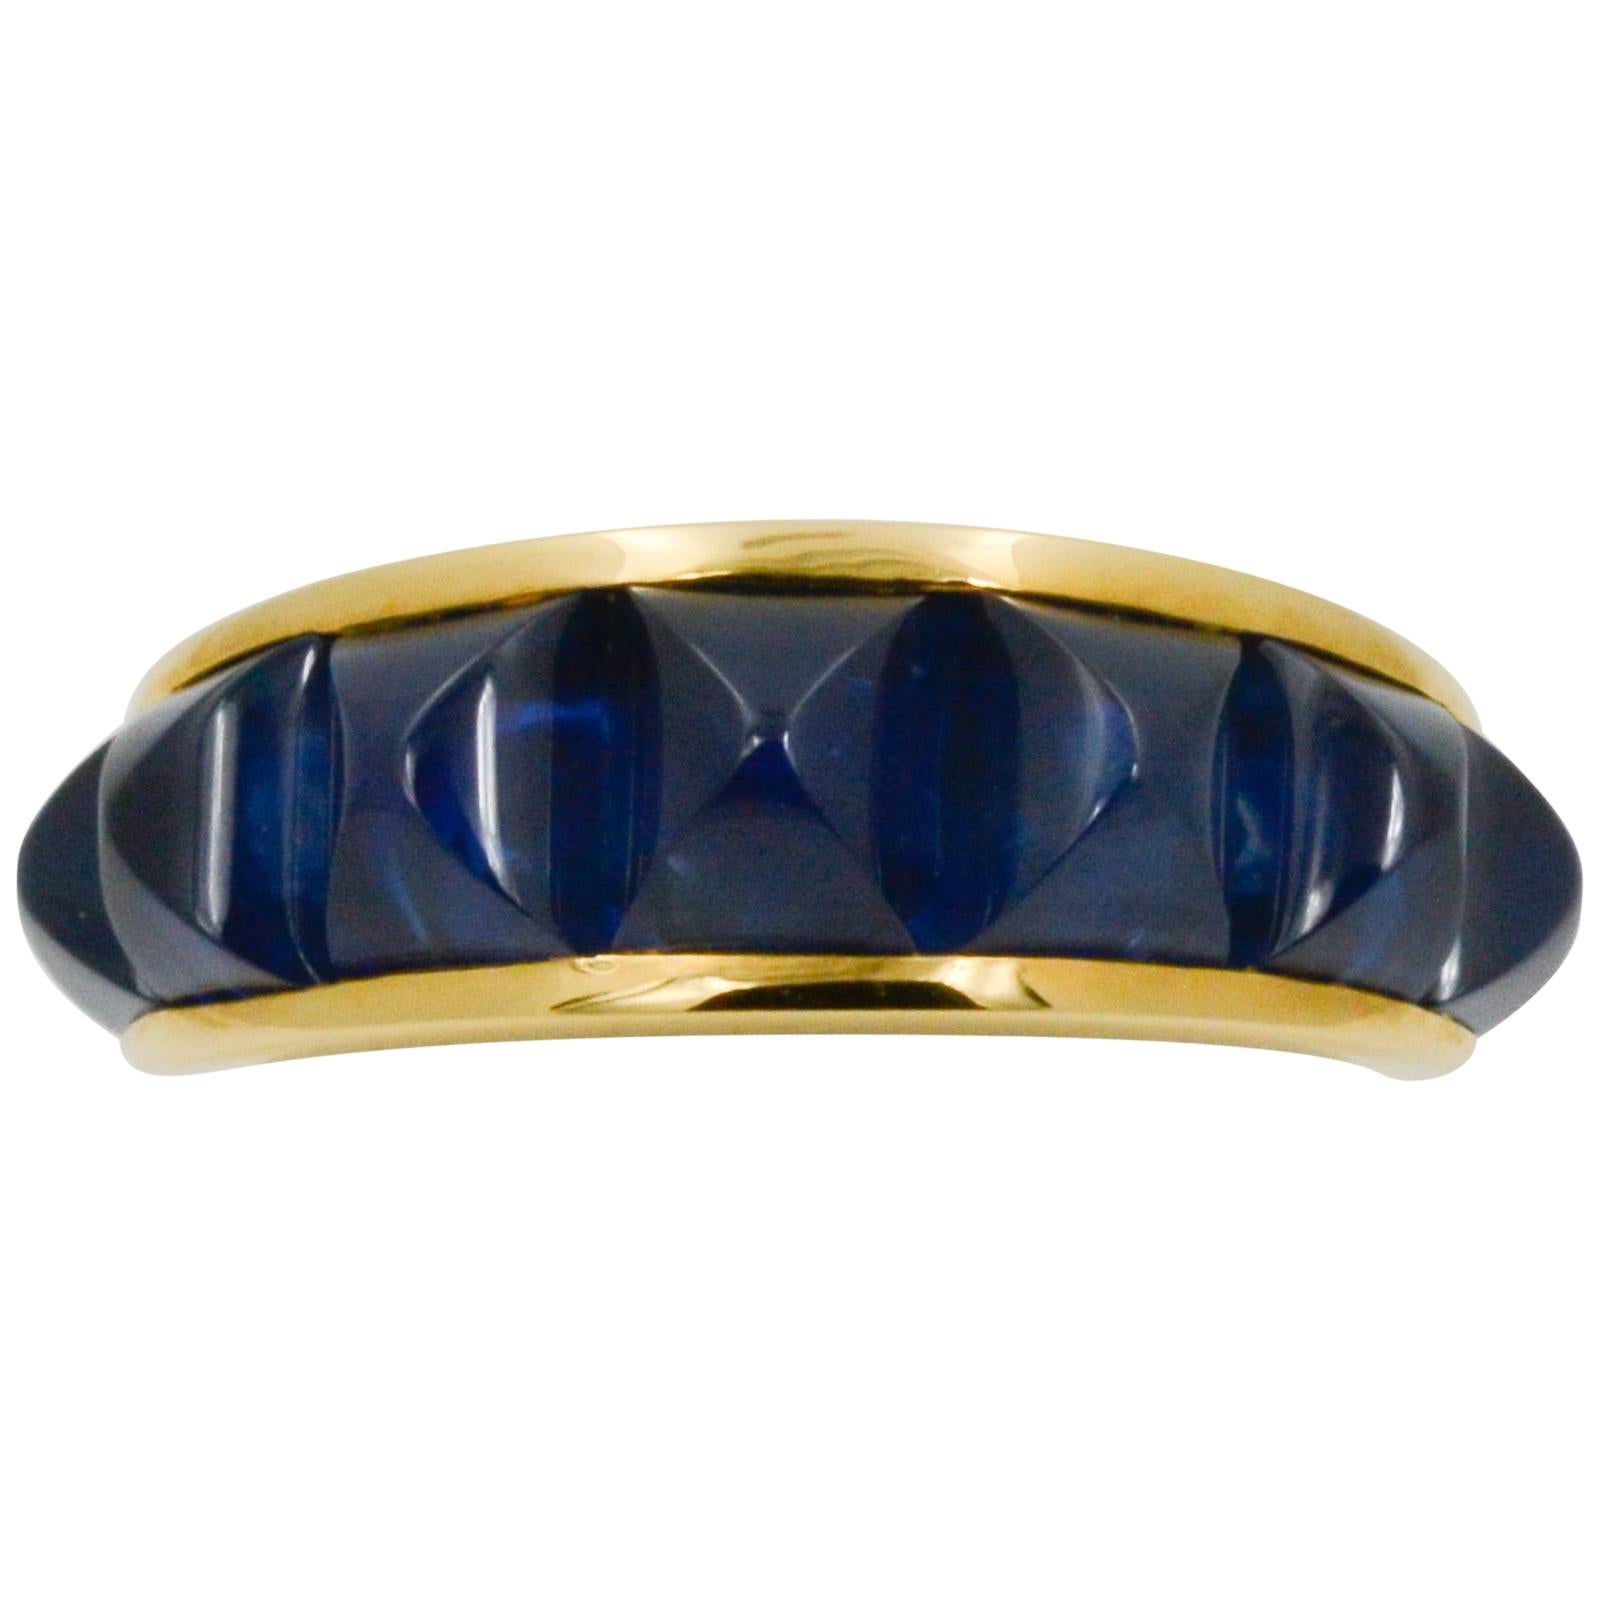 From Seaman Schepps, this 18 karat yellow gold Portofino ring features seven faceted blue sapphires weighing an approximate combined 7.81 carats. The ring is a size 8, and can be sized one (1) size up or down.